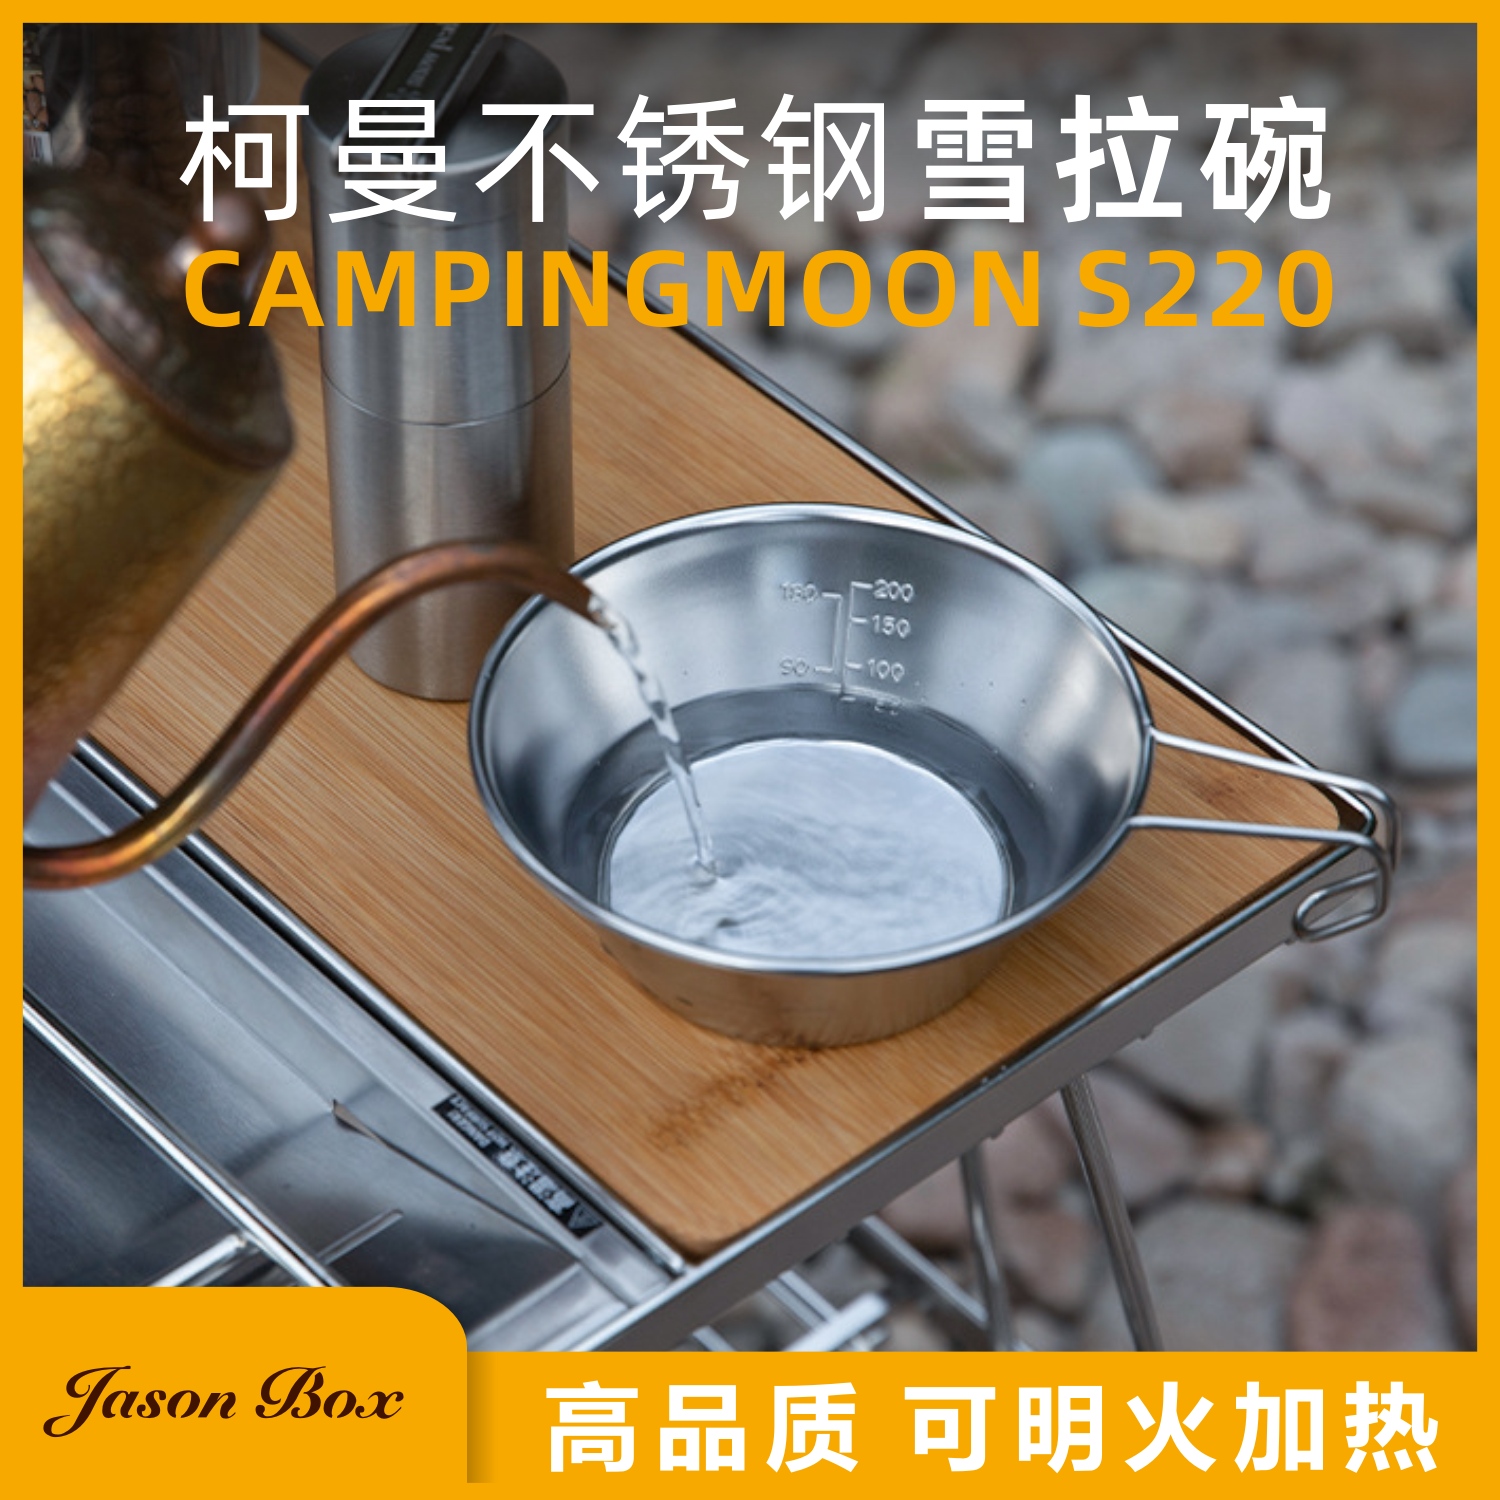 Simple Sensen Outdoor Stainless Steel Snow Pull Cup Bowls Picnic Rice Bowls Portable Cups Multipurpose Mountaineering Camping Cooker can clear the fire